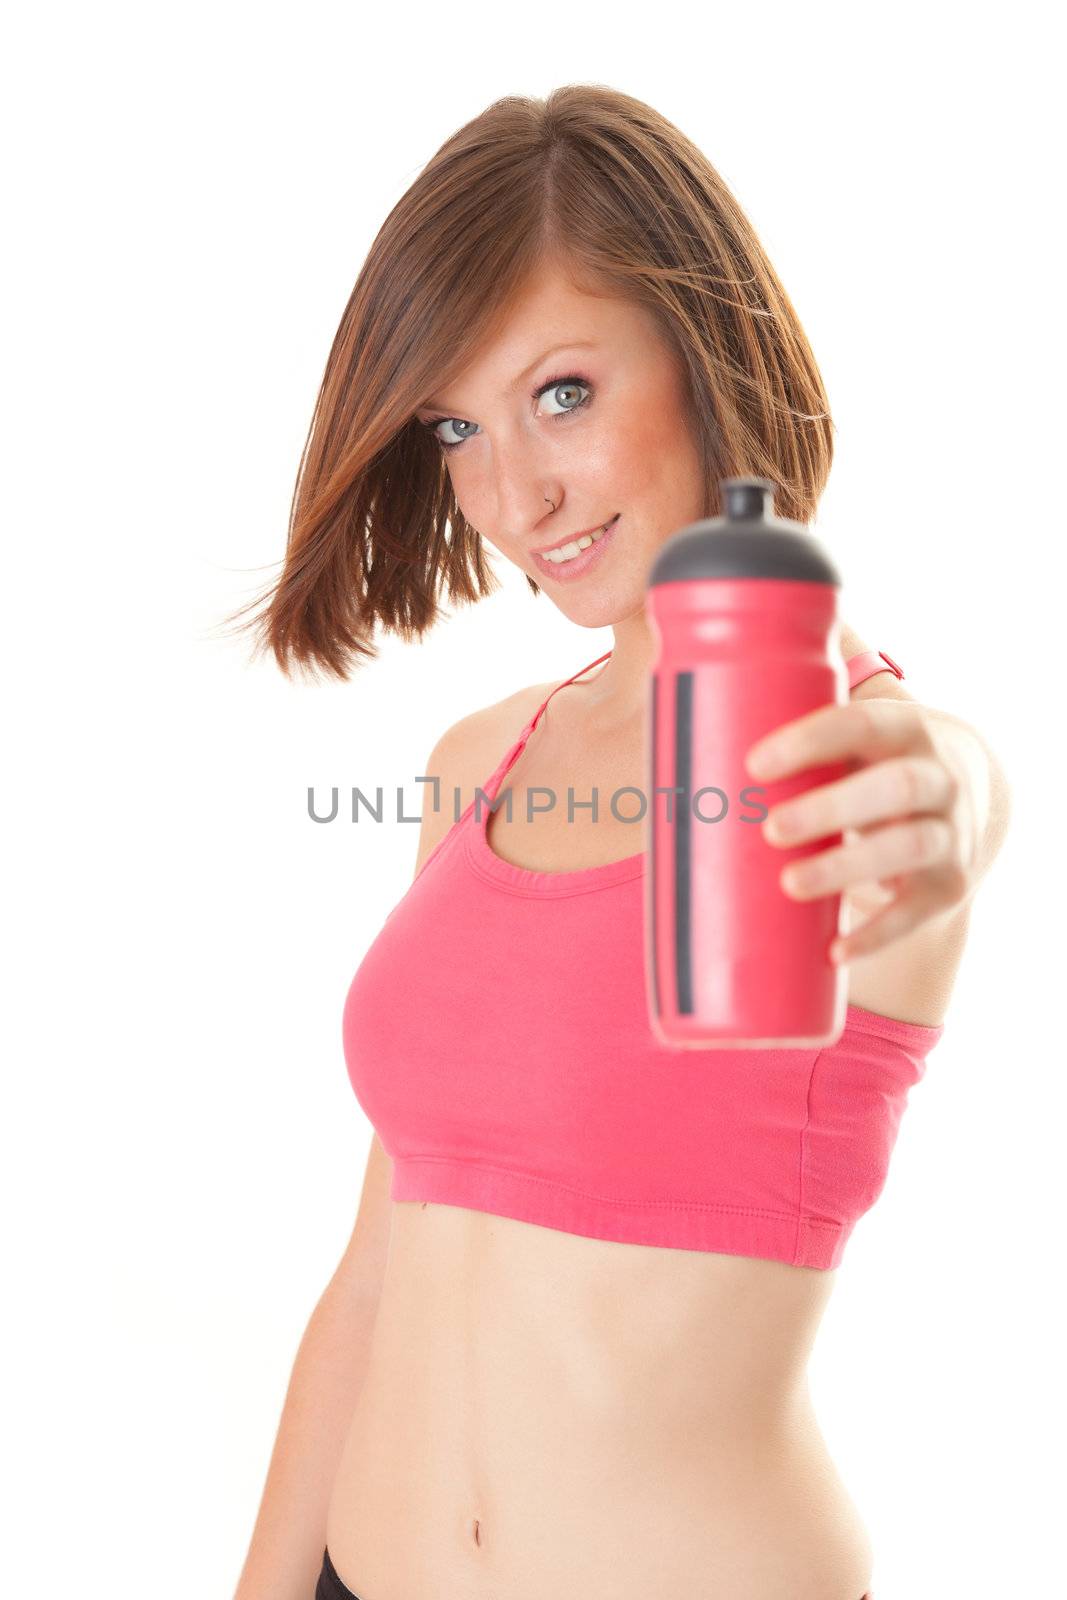 young beautiful sport woman portrait with a bottle isolated on w by Lcrespi